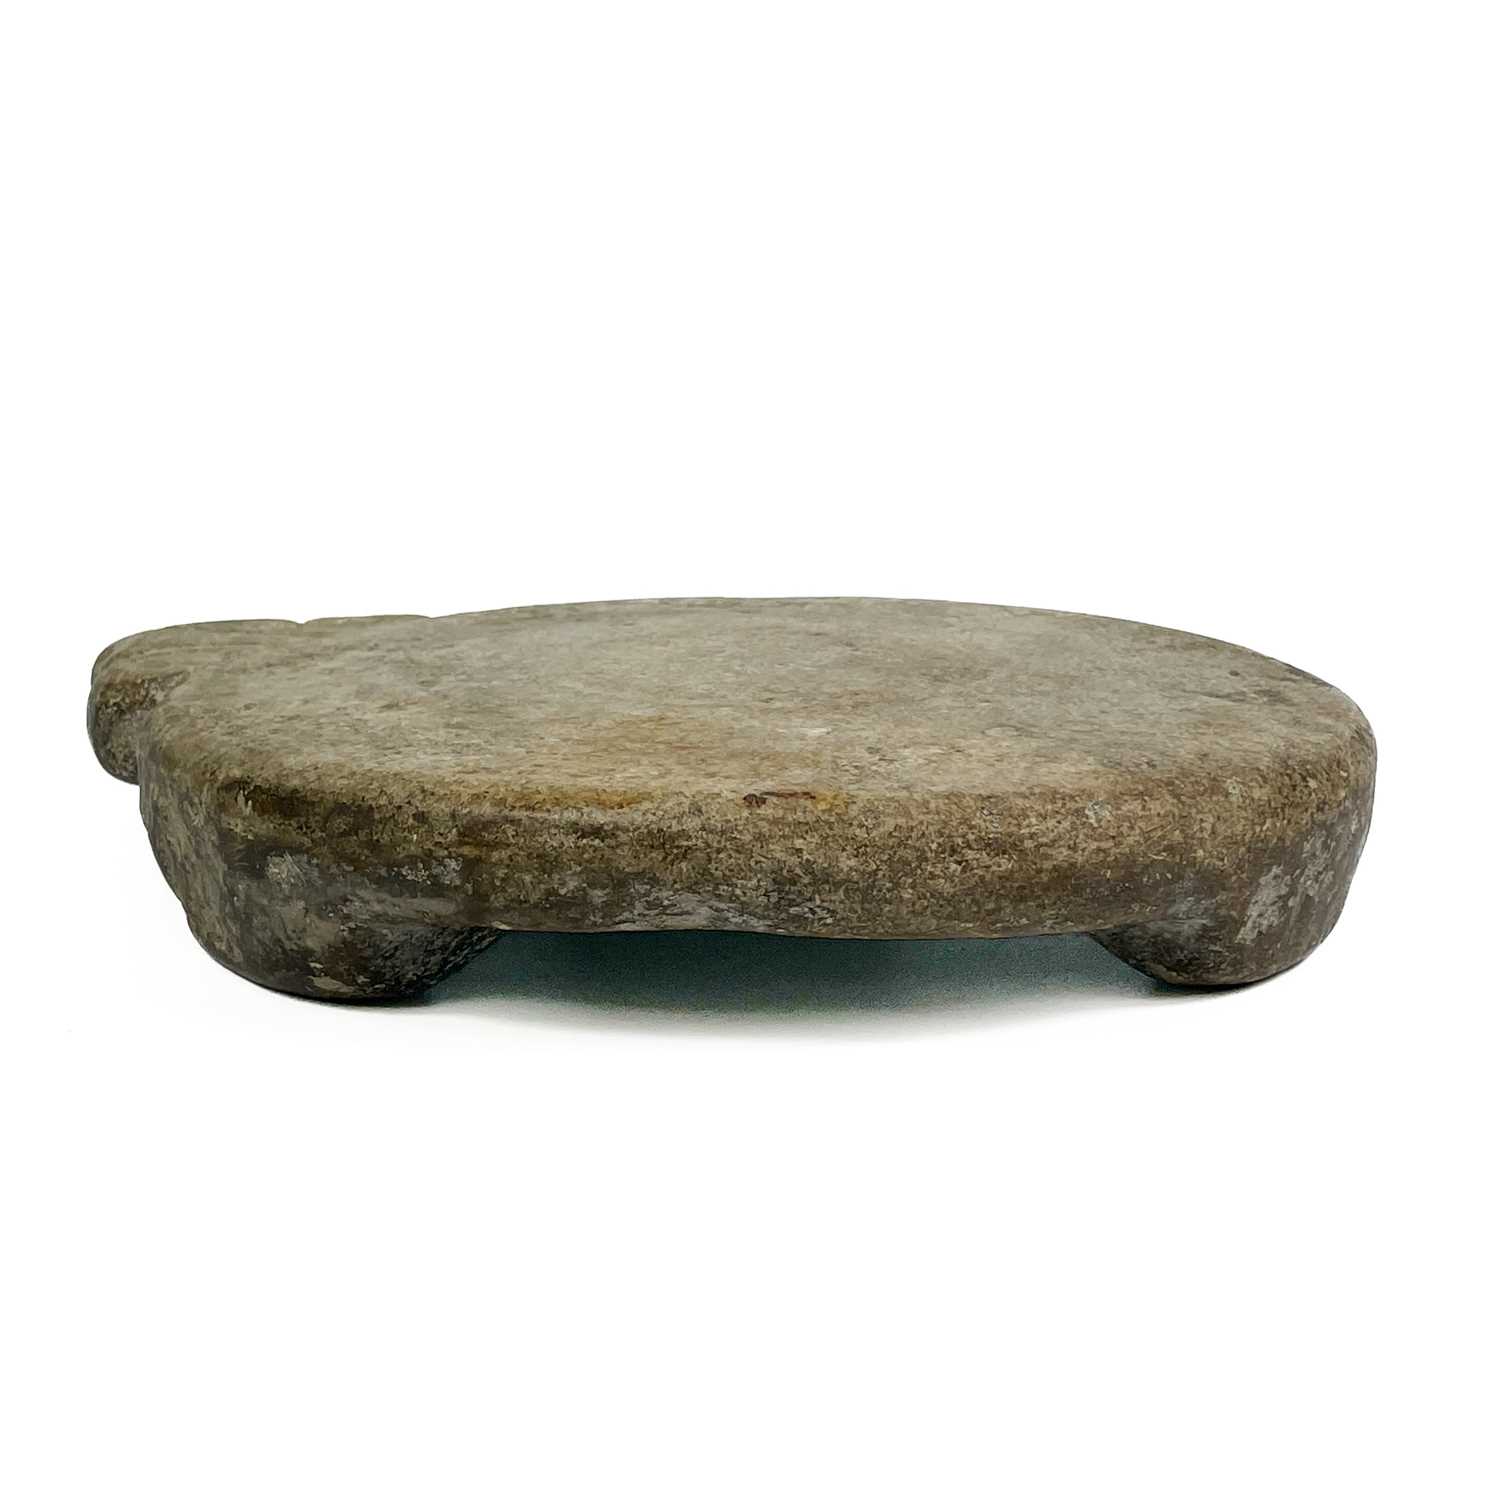 Lot 12 - An Indian carved stone chapati board.